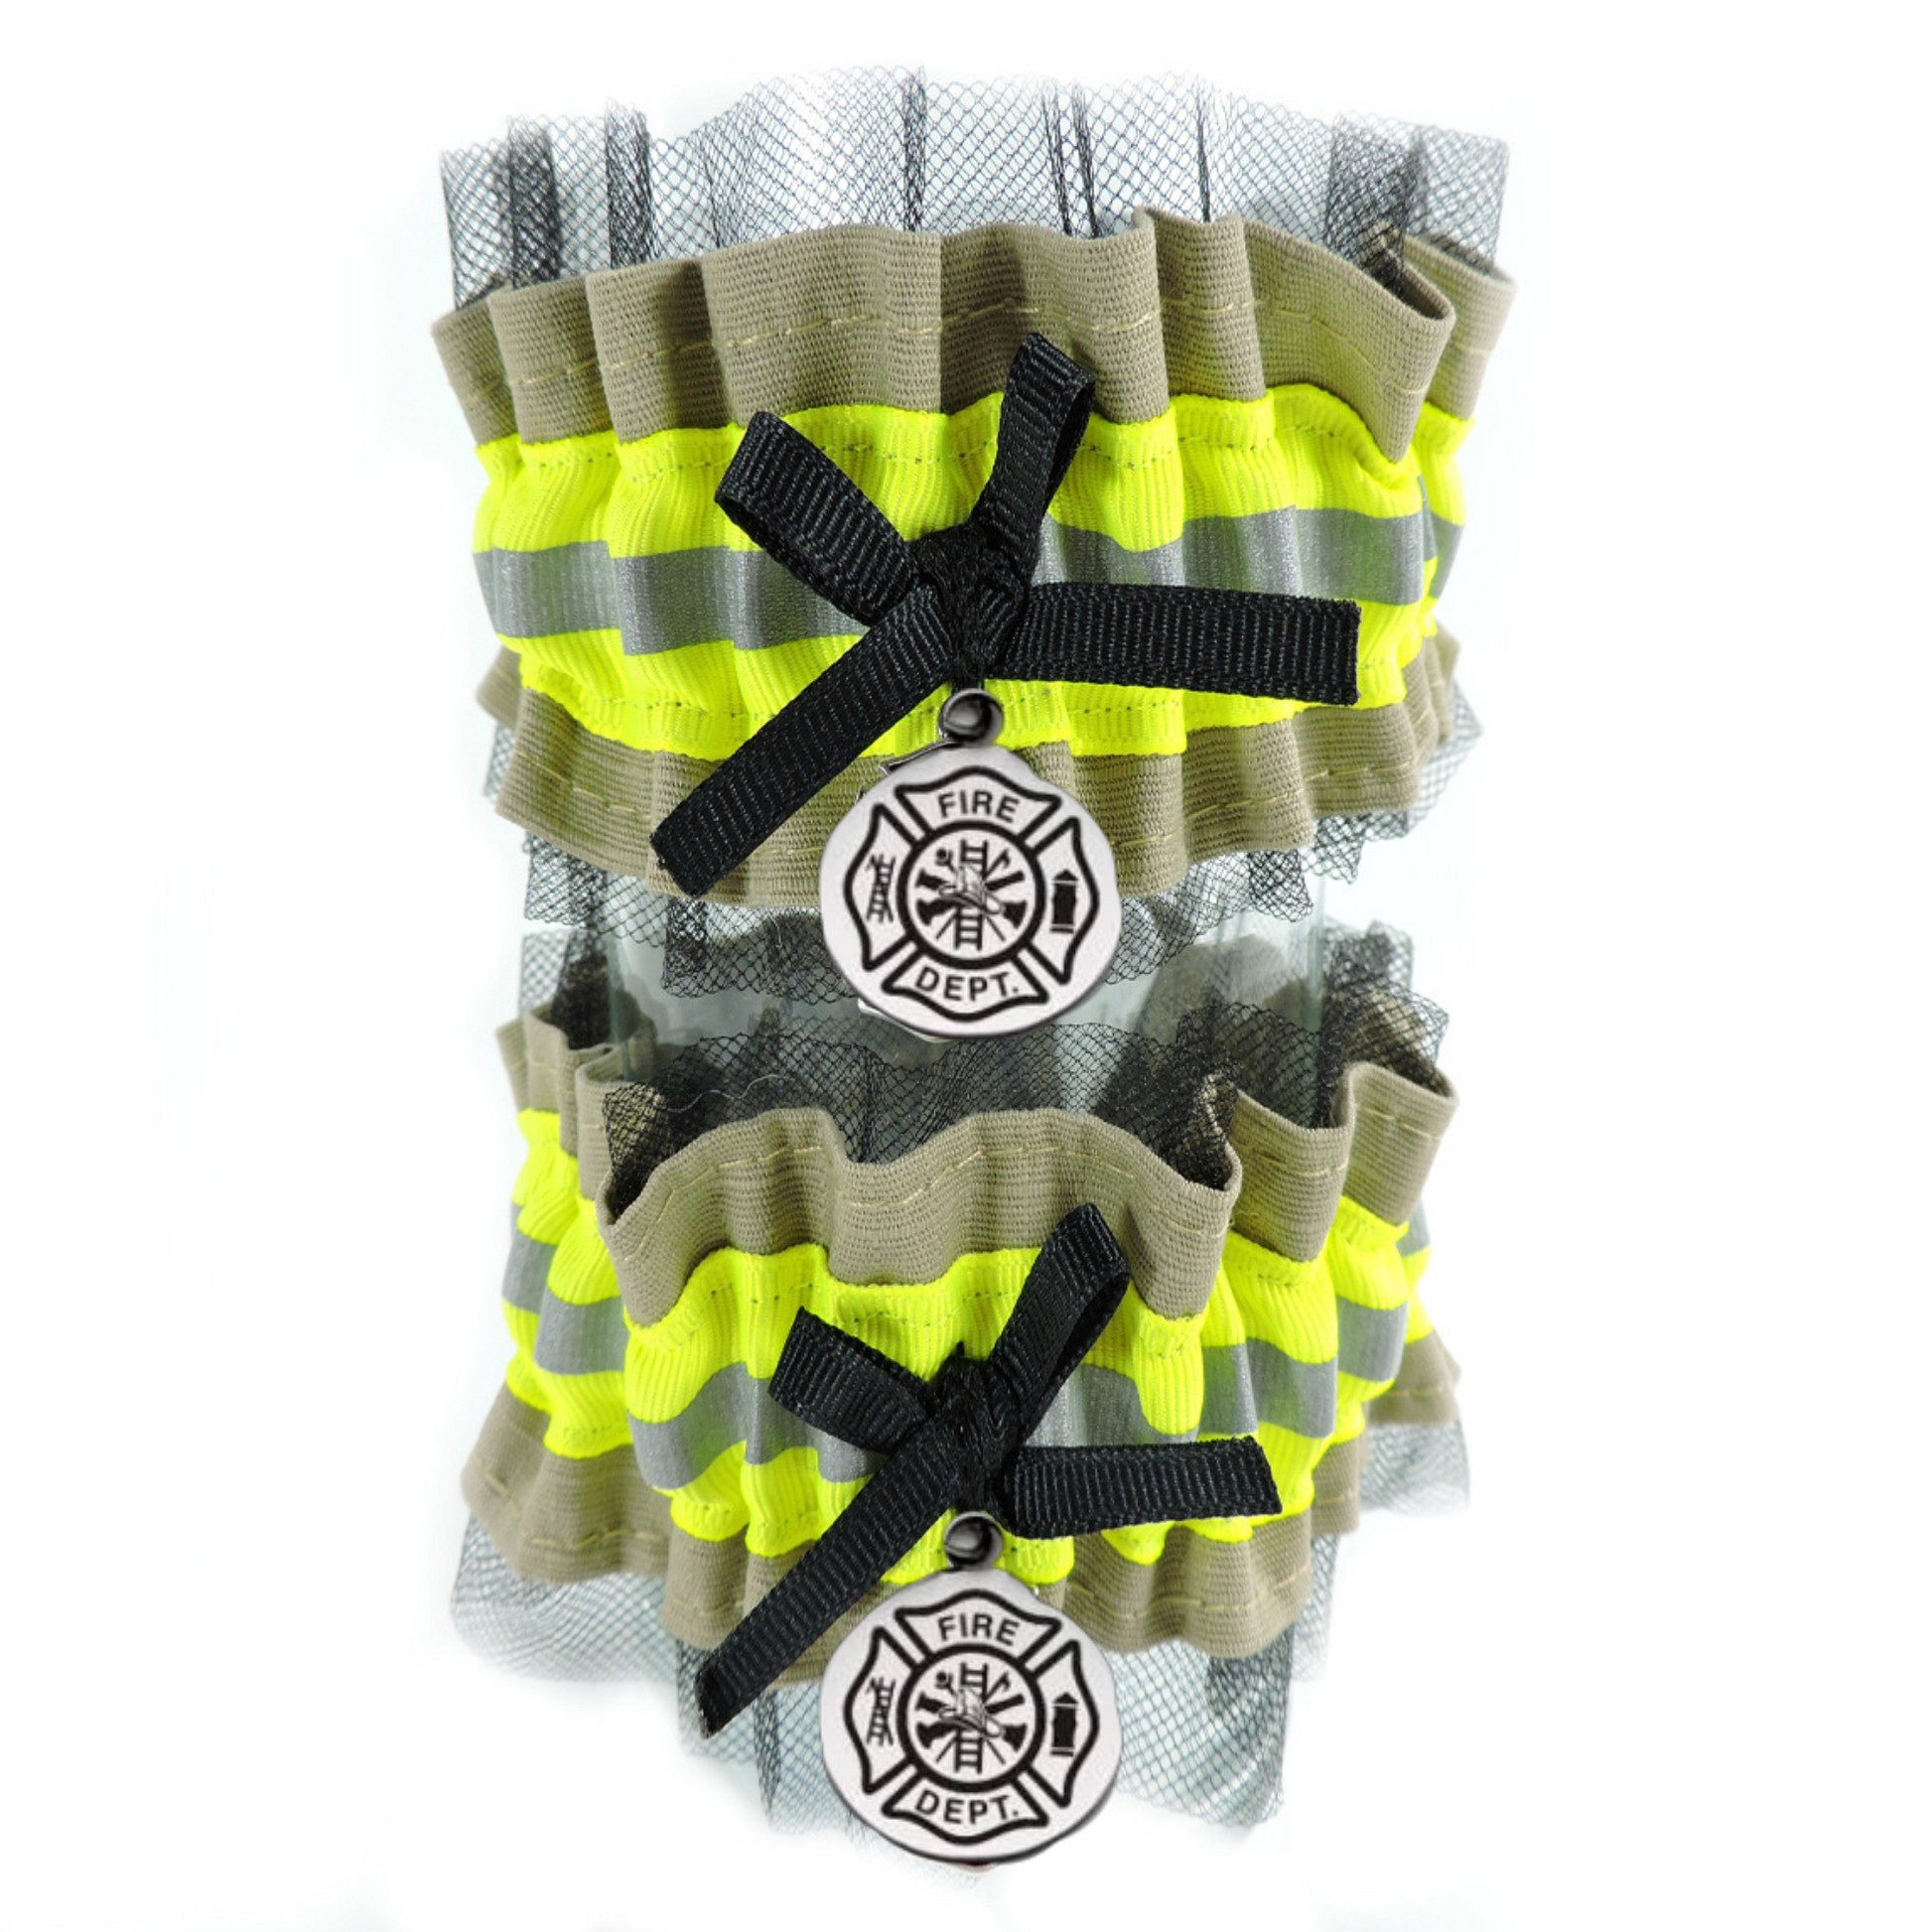 Firefighter Wedding Garter with Tulle set  tan fabric neon yellow reflective tape